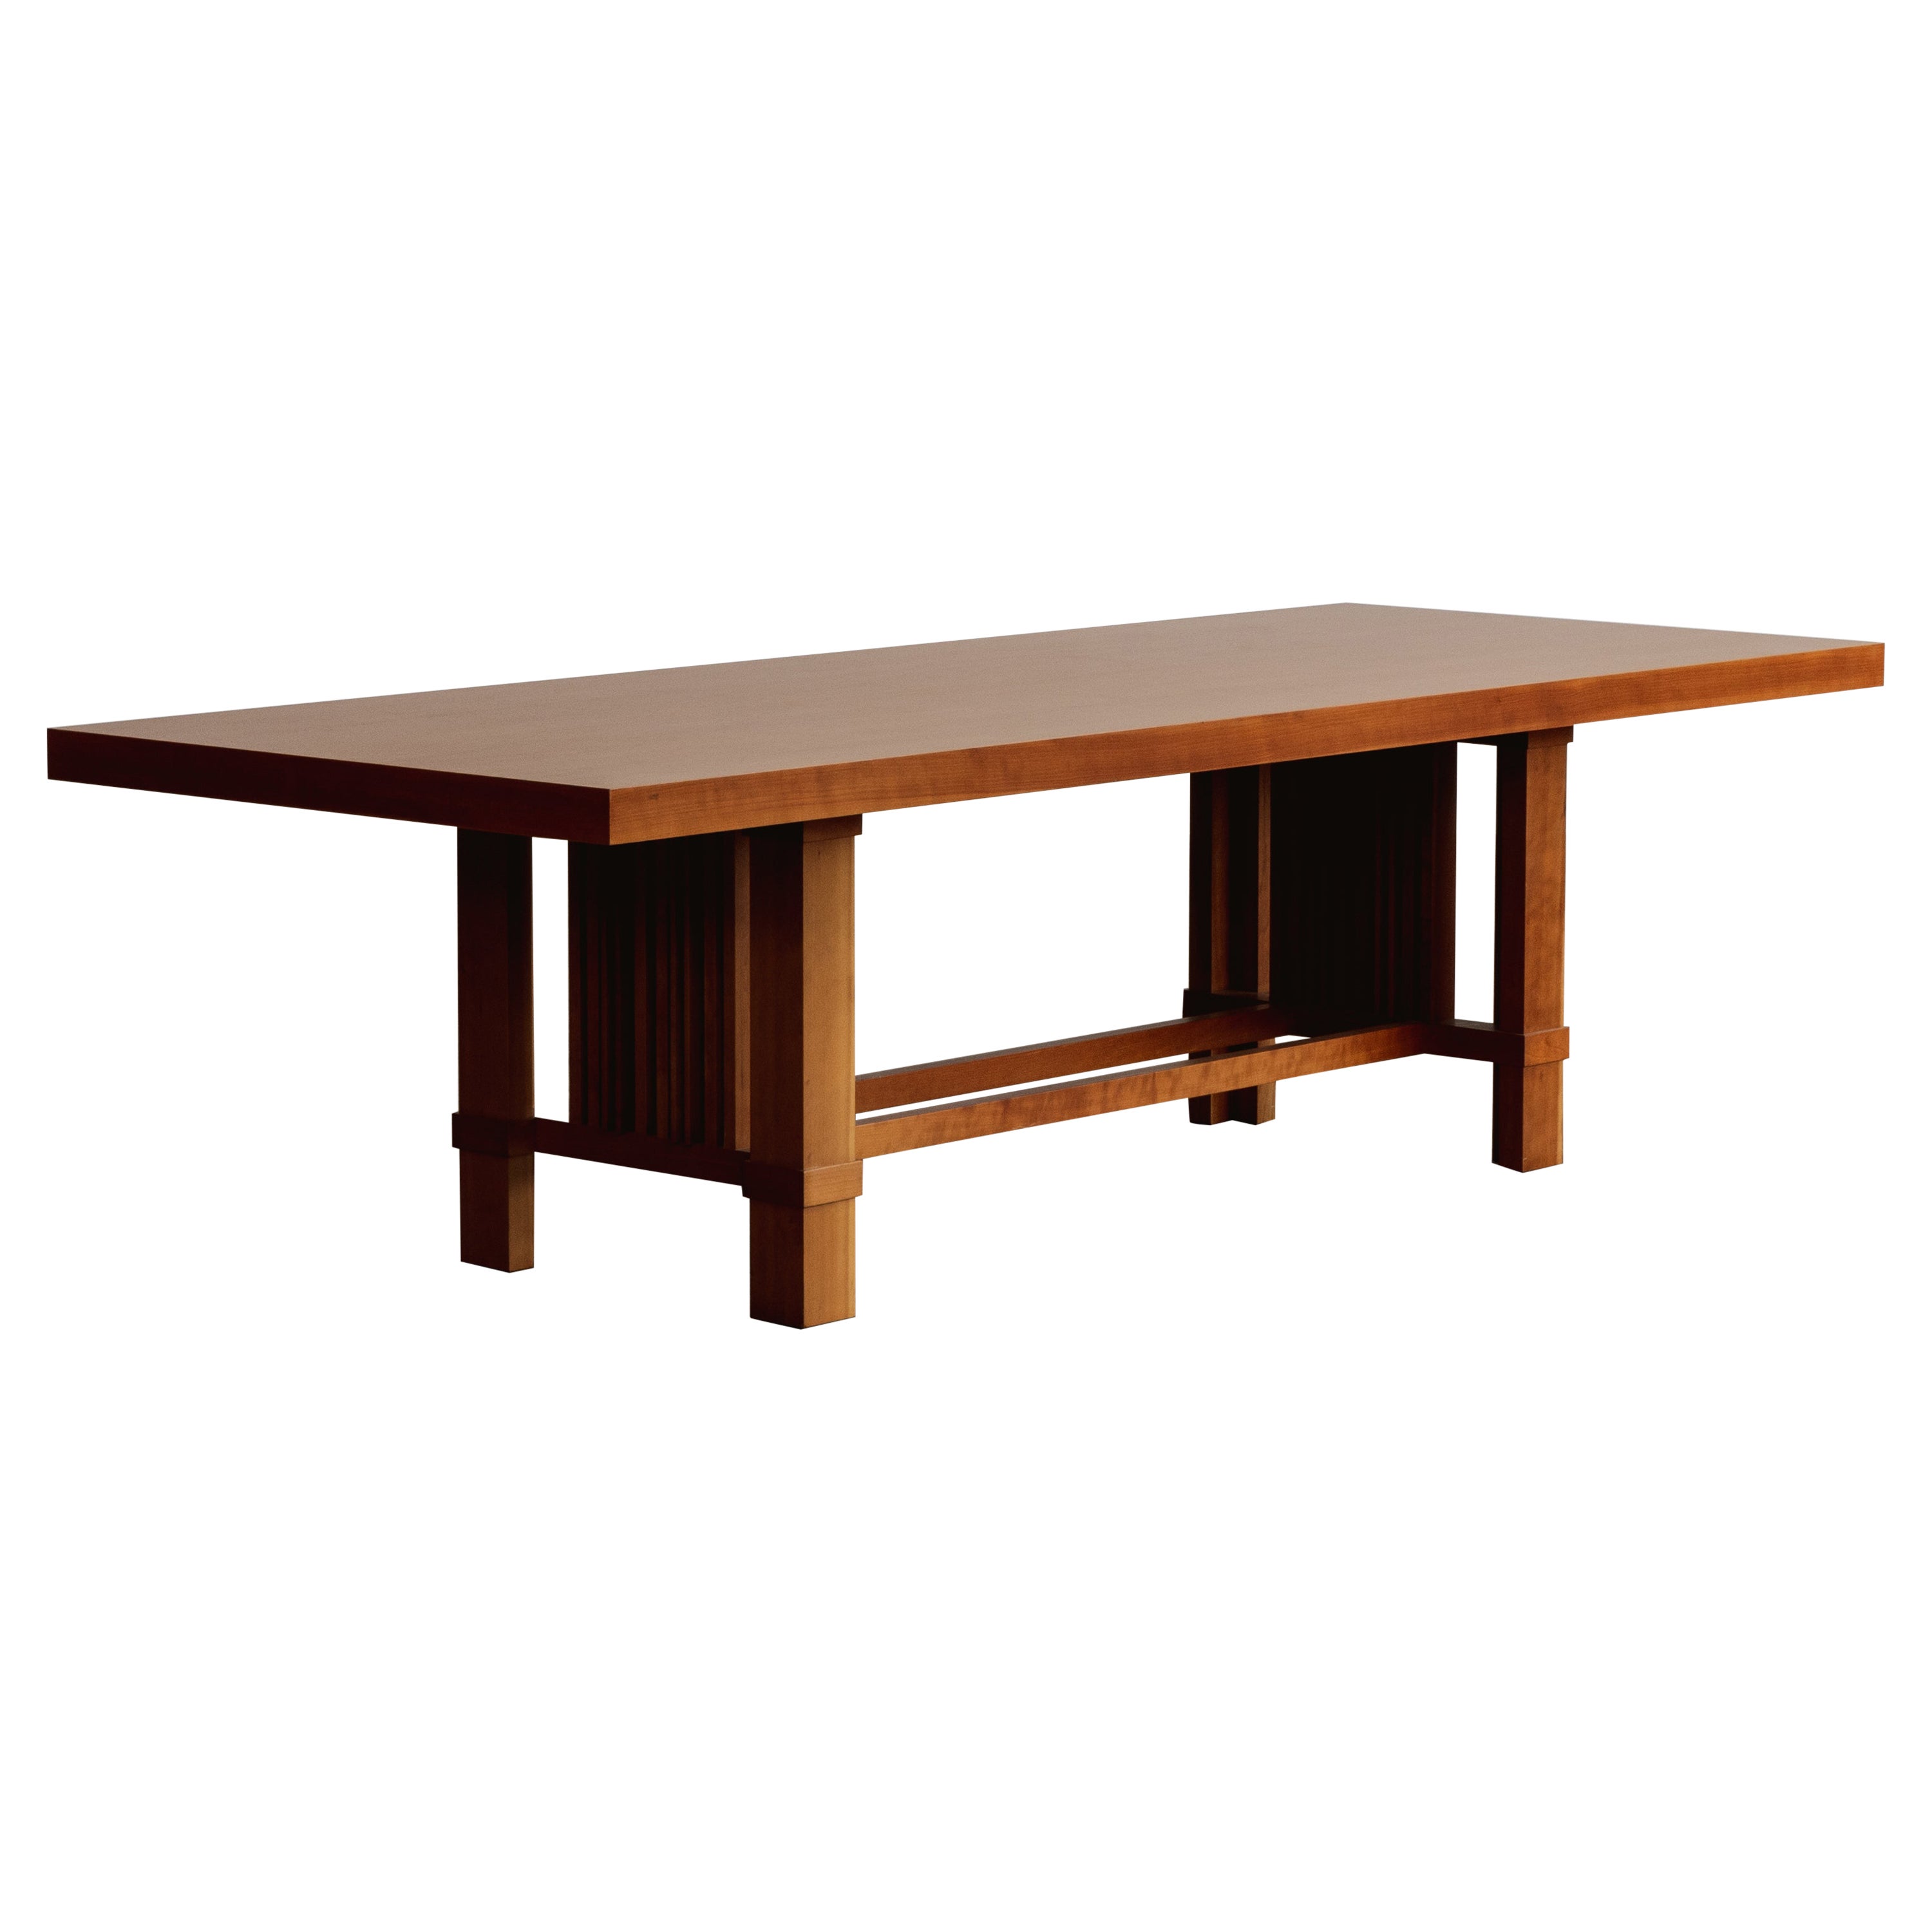 Frank Lloyd Wright “608 Taliesin” Dining Table for Cassina, 1986 For Sale